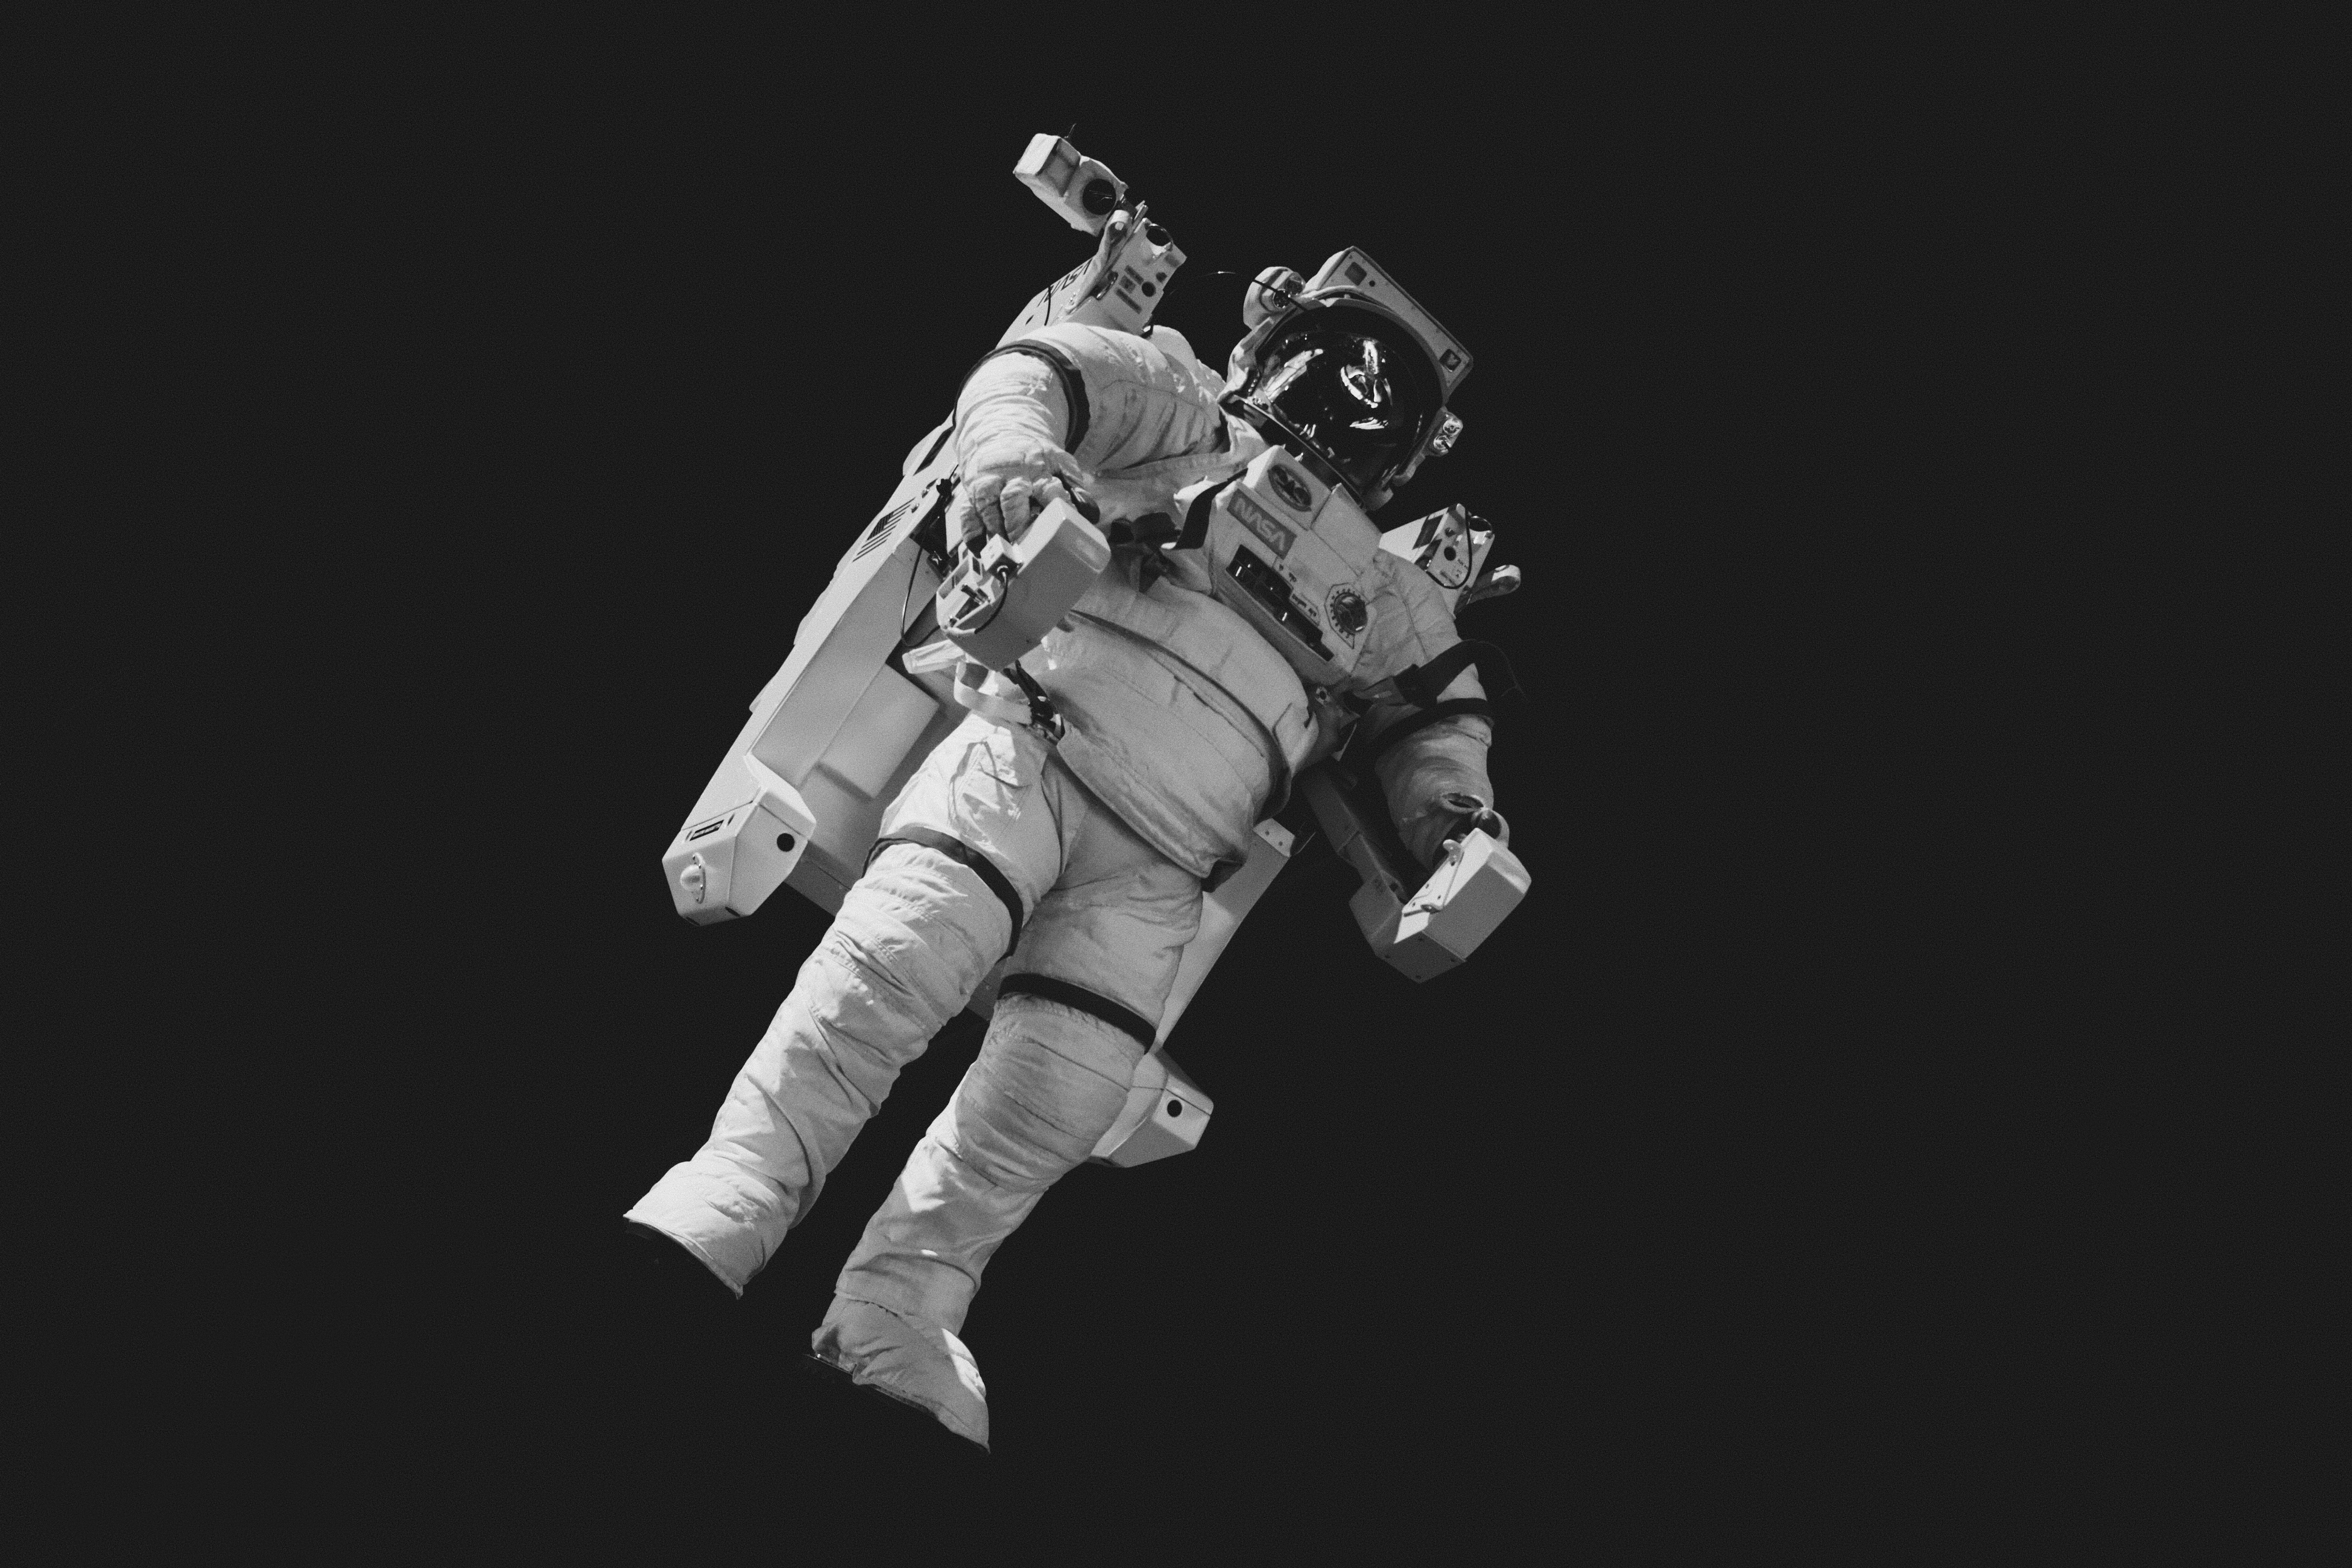 Astronaut in a space suit on deep space mission - digital innovation growth consultancy - Photo by Brian McGowan  | de Paula